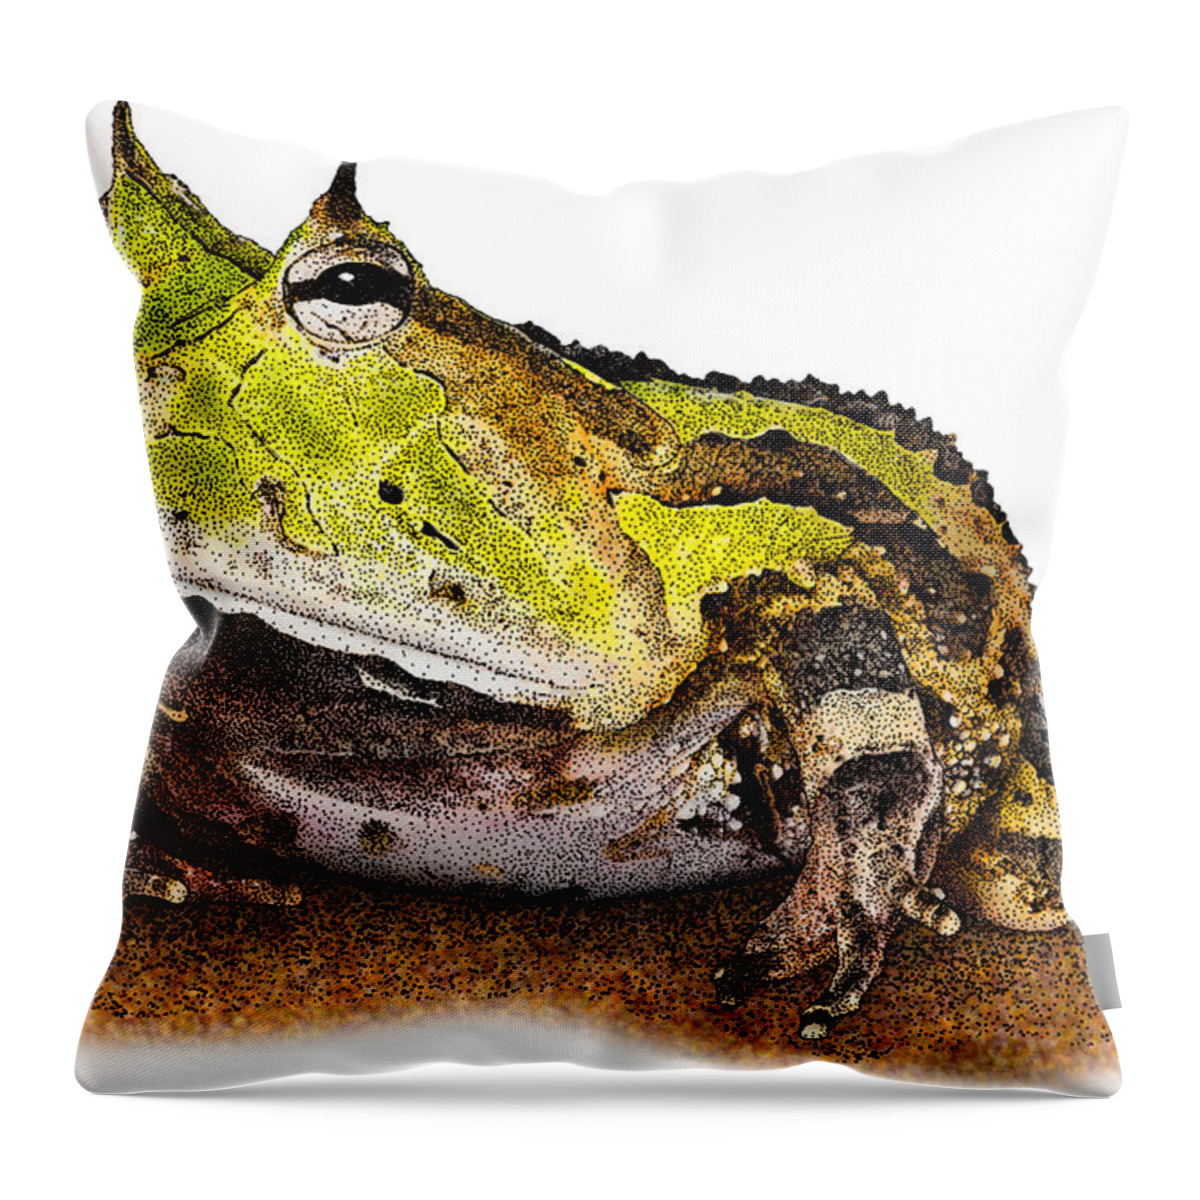 Surinam Horned Frog Throw Pillow featuring the photograph Surinam Horned Frog, C. Cornuta by Roger Hall